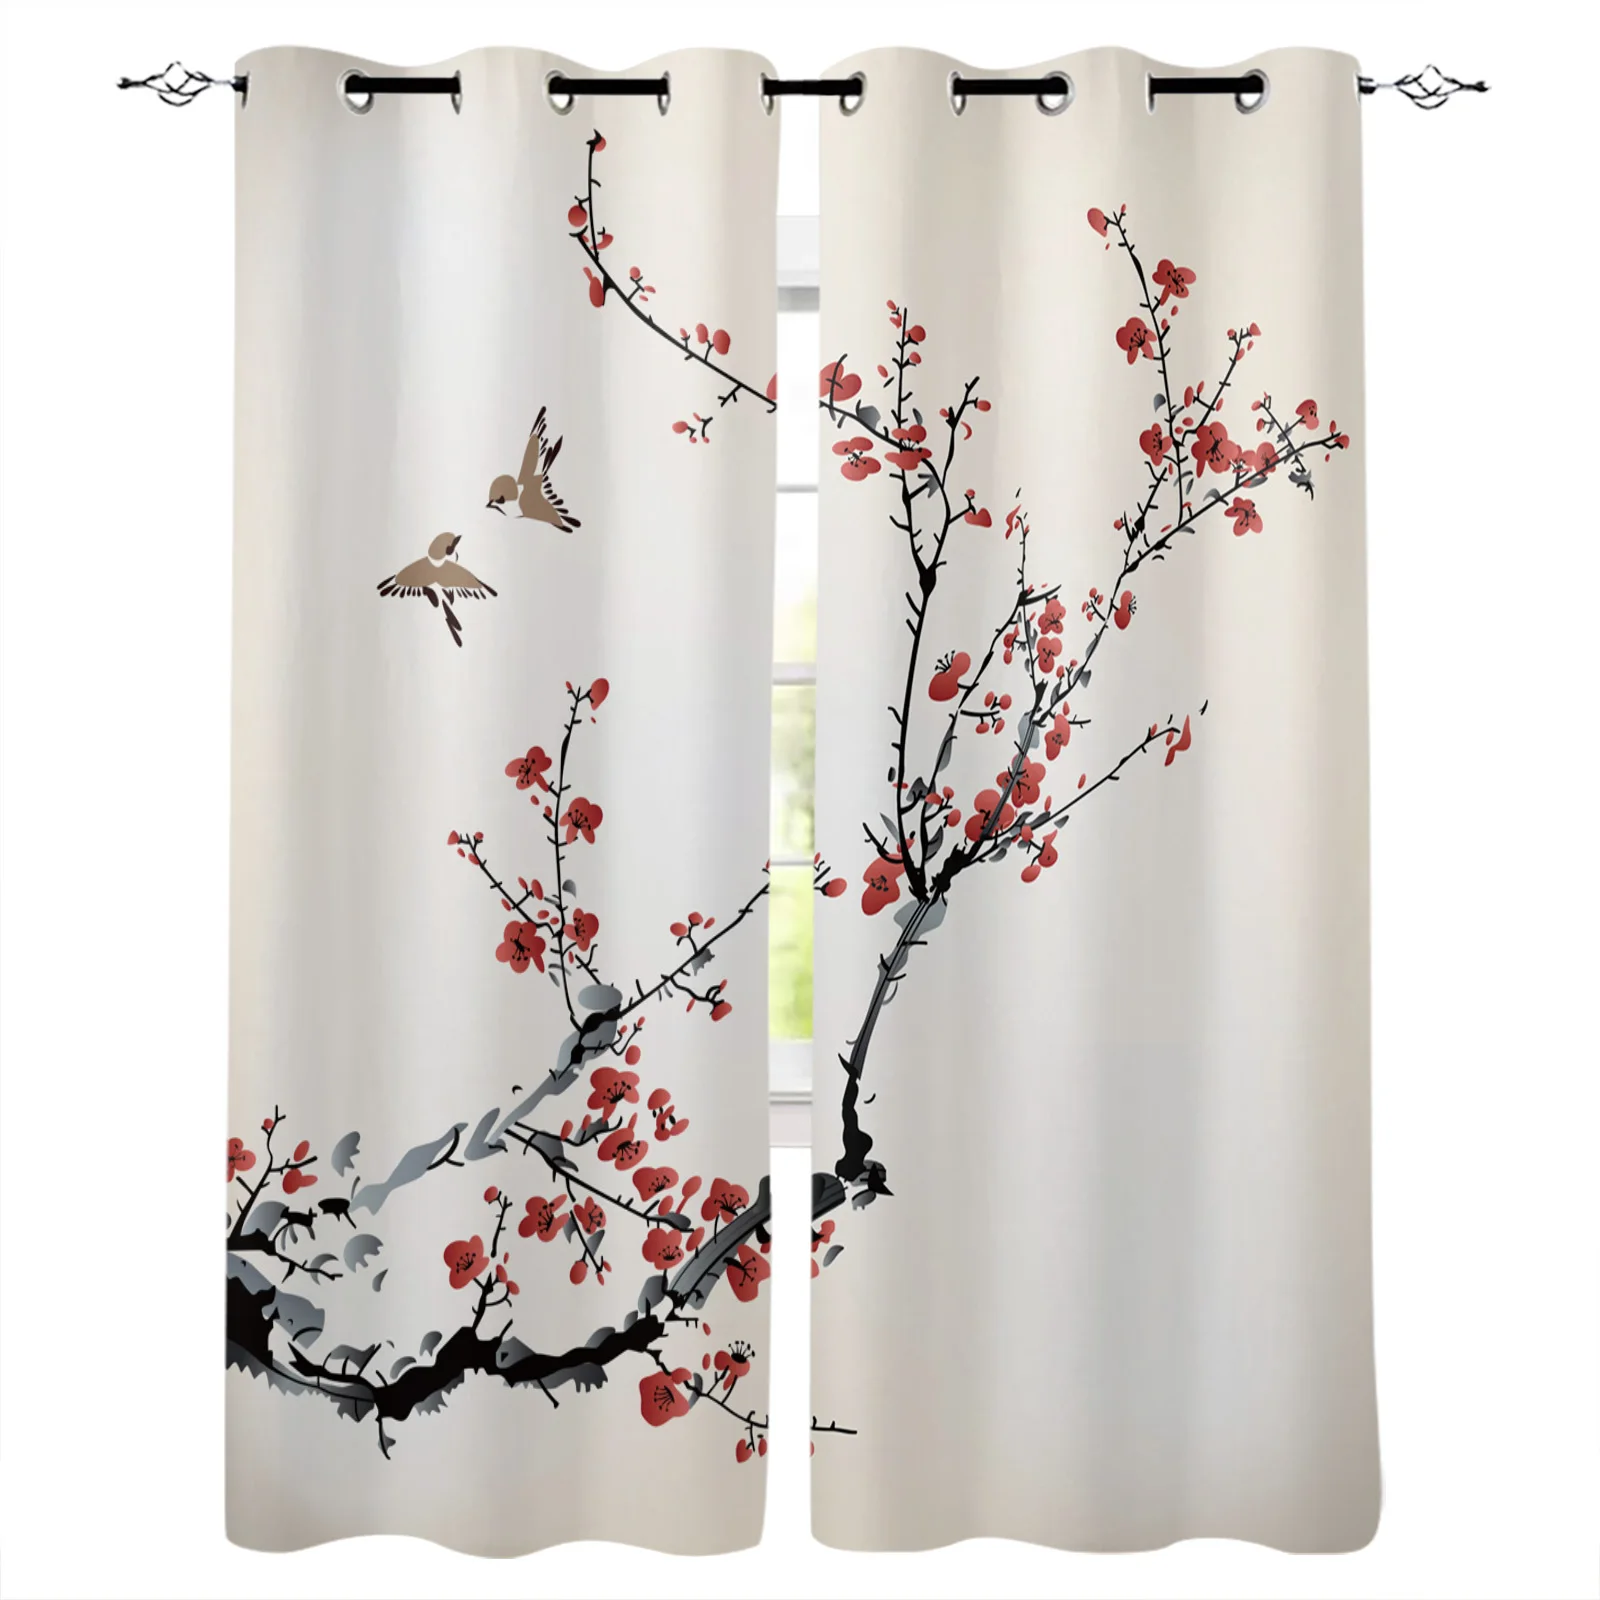 

Plum Blossom Branches Ink Style Modern Blackout Curtains for Living Room Decoration Curtain Bedroom Kids Curtain Drapes